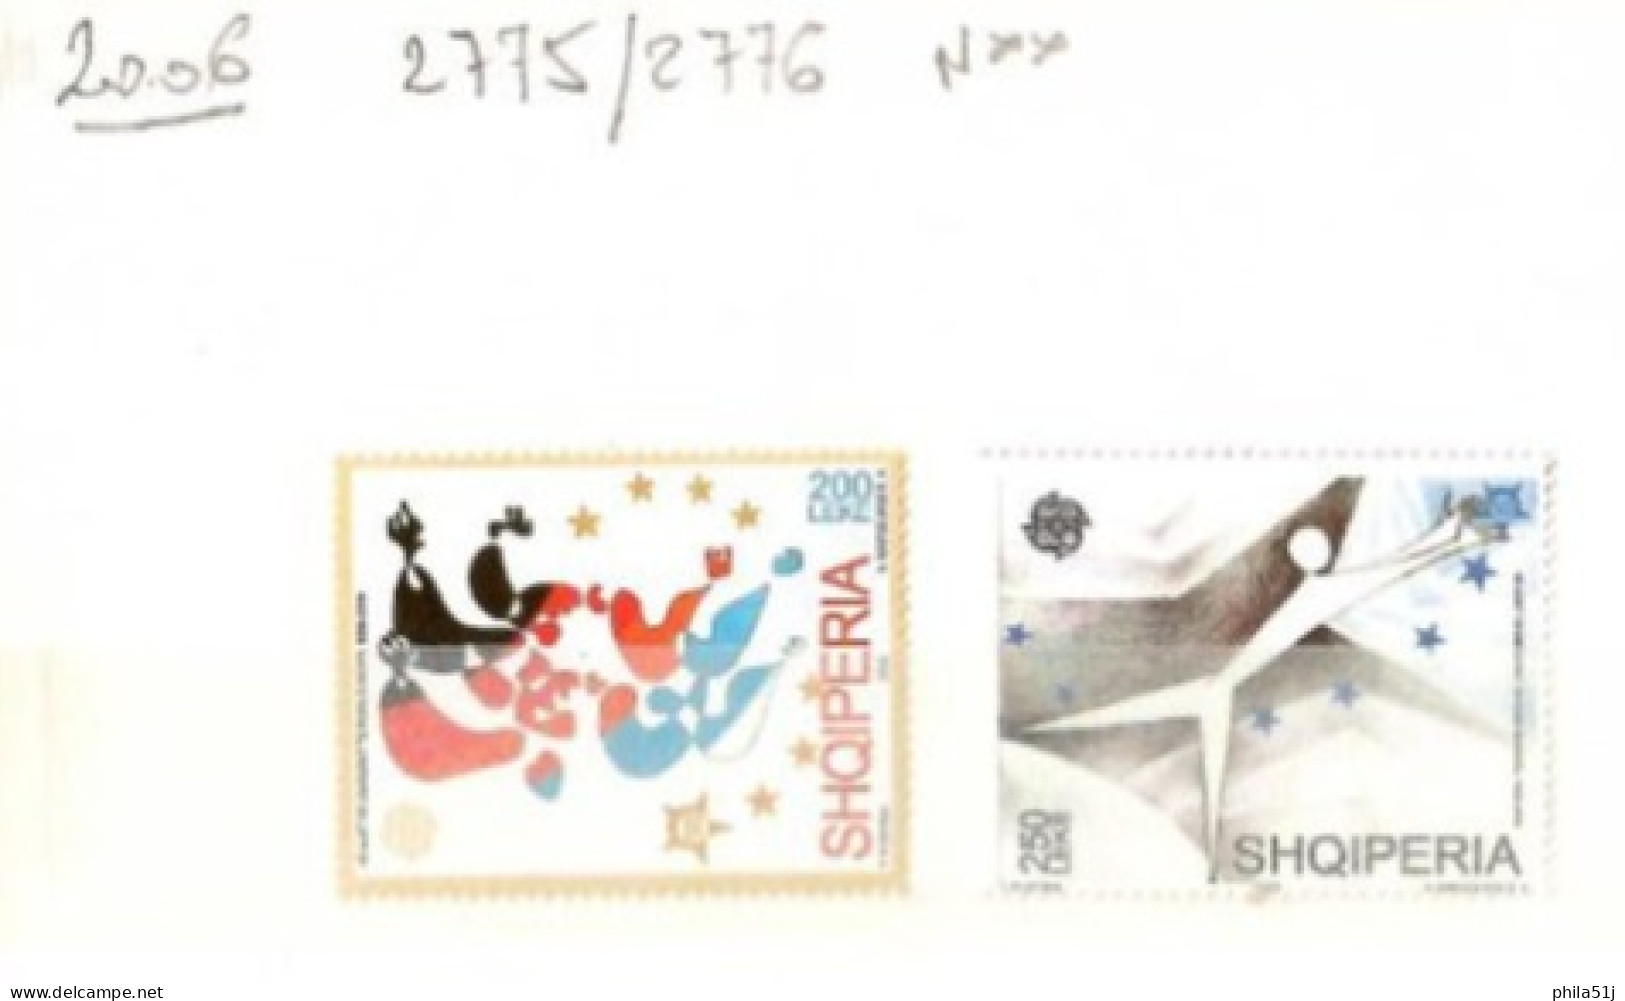 EUROPA  ALBANIE---ANNEE 2001 A 2006---NEUF** & OBL---1/3 DE COTE - Collections